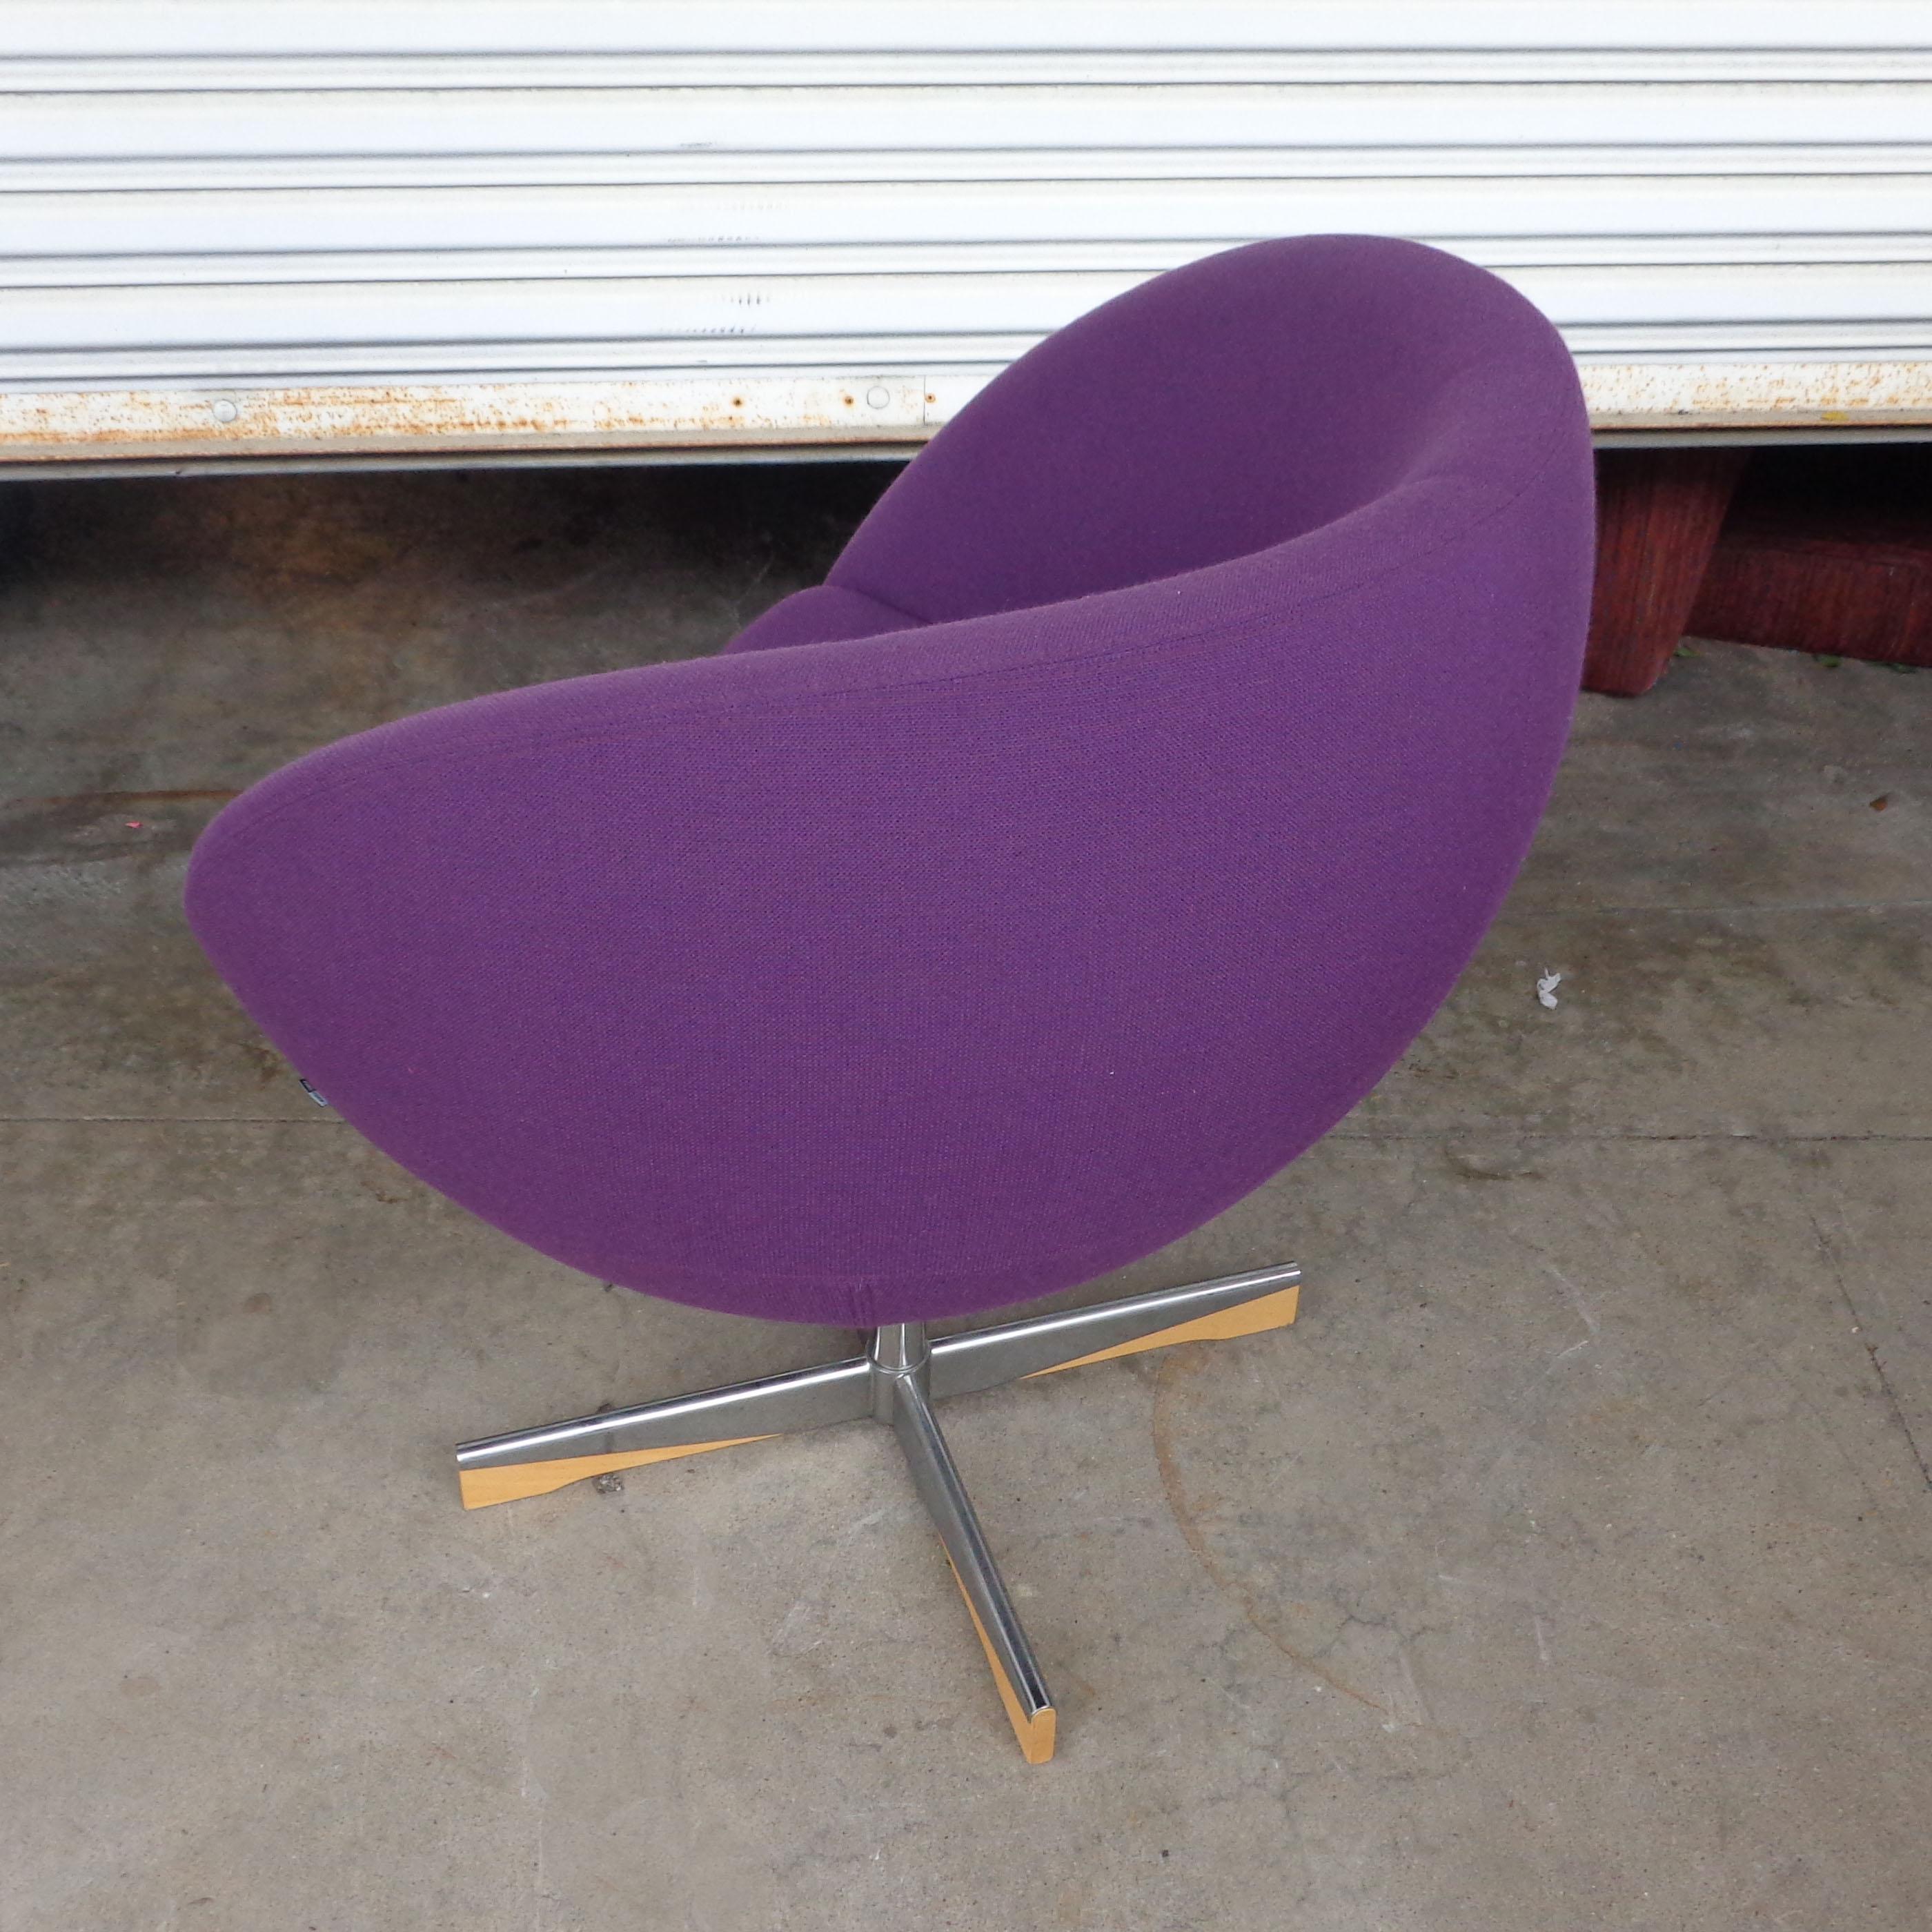 Mid-Century Modern 1 1960s Planet Chair by Sven Ivar Dysthe for Fora Form For Sale